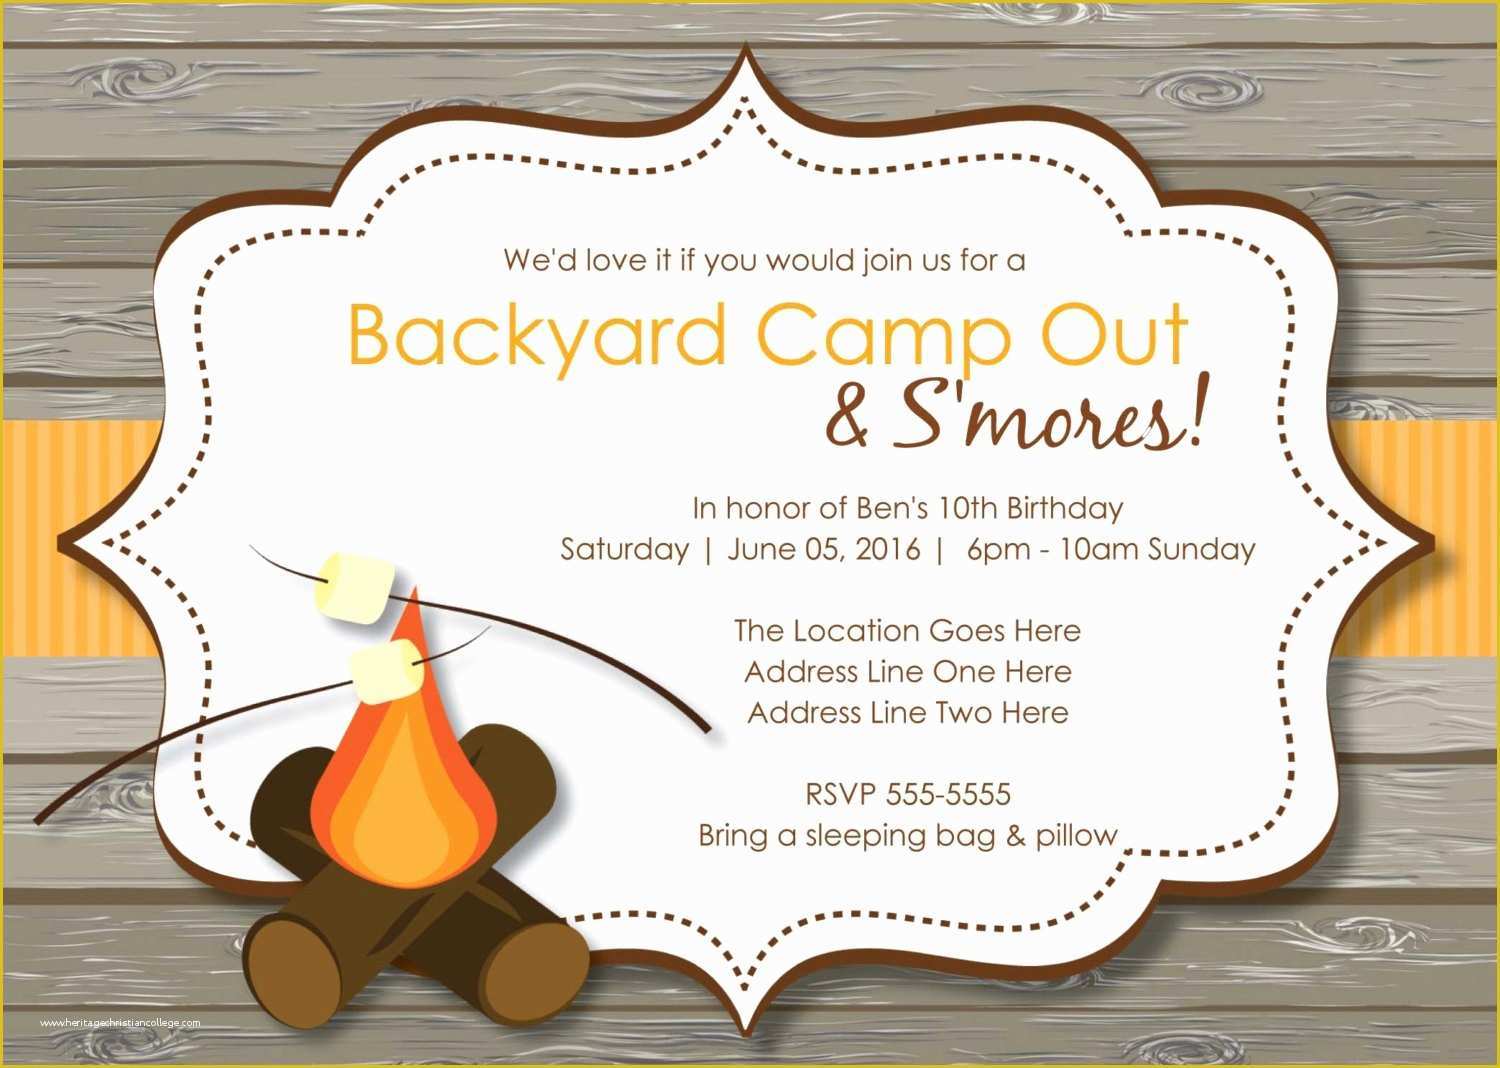 Campfire Invitation Template Free Of Rustic S Mores Camp Out Invitations Bonfire by Shysocialites